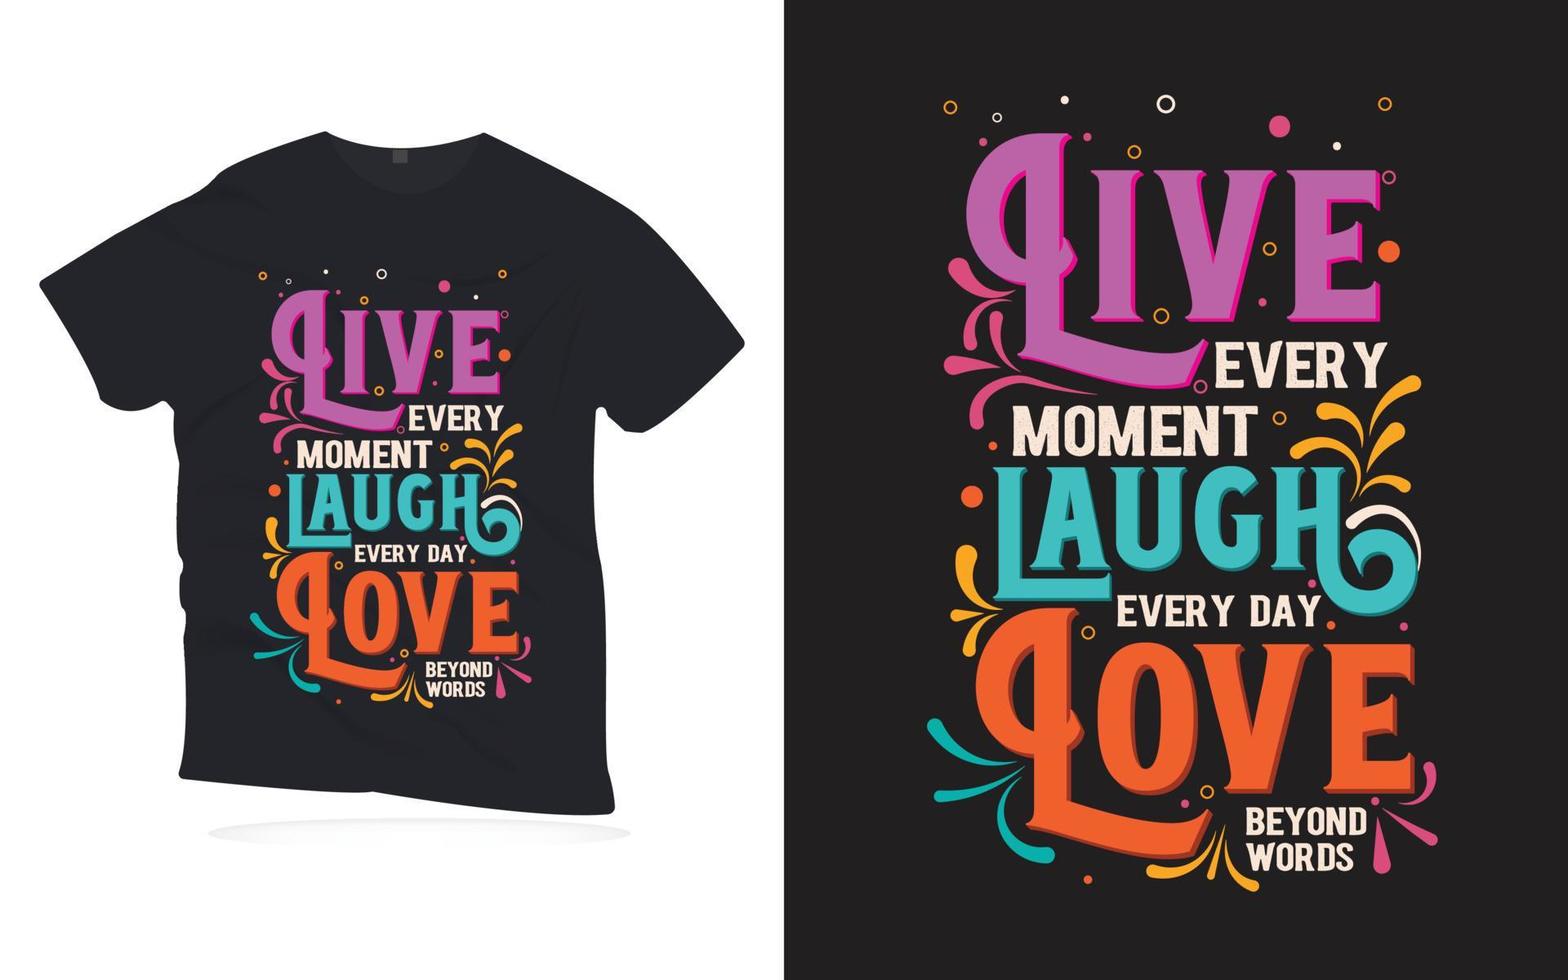 live every moment laugh every day love Motivational Quotes lettering t-shirt design. vector